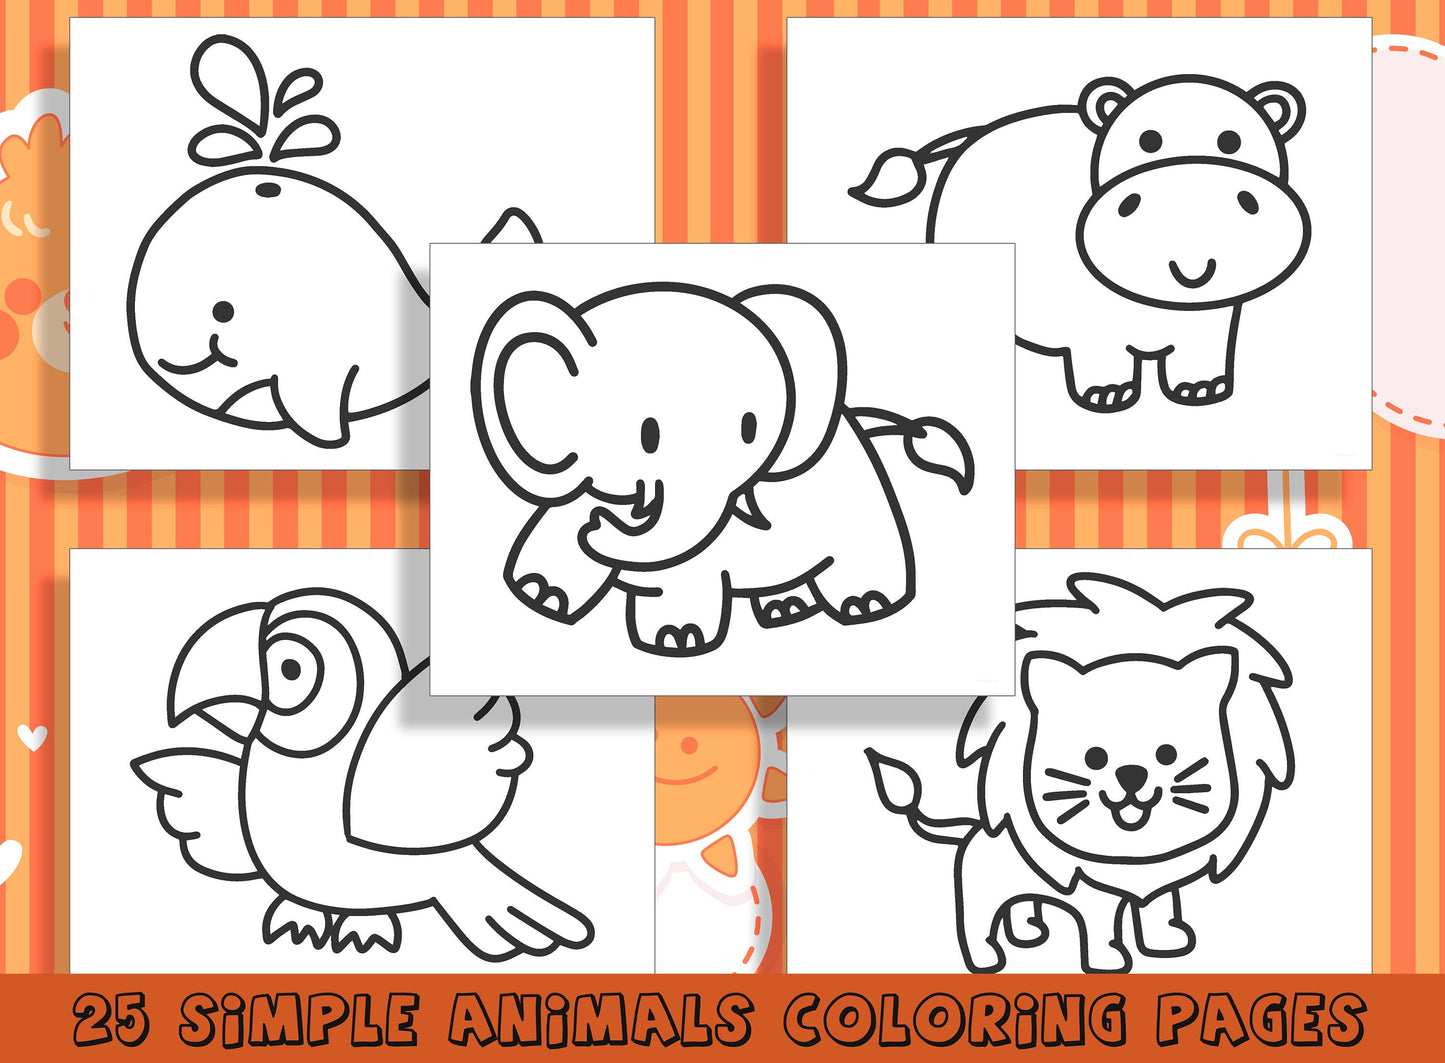 25 Simple Animal Coloring Pages for Preschool and Kindergarten, PDF File, Instant Download